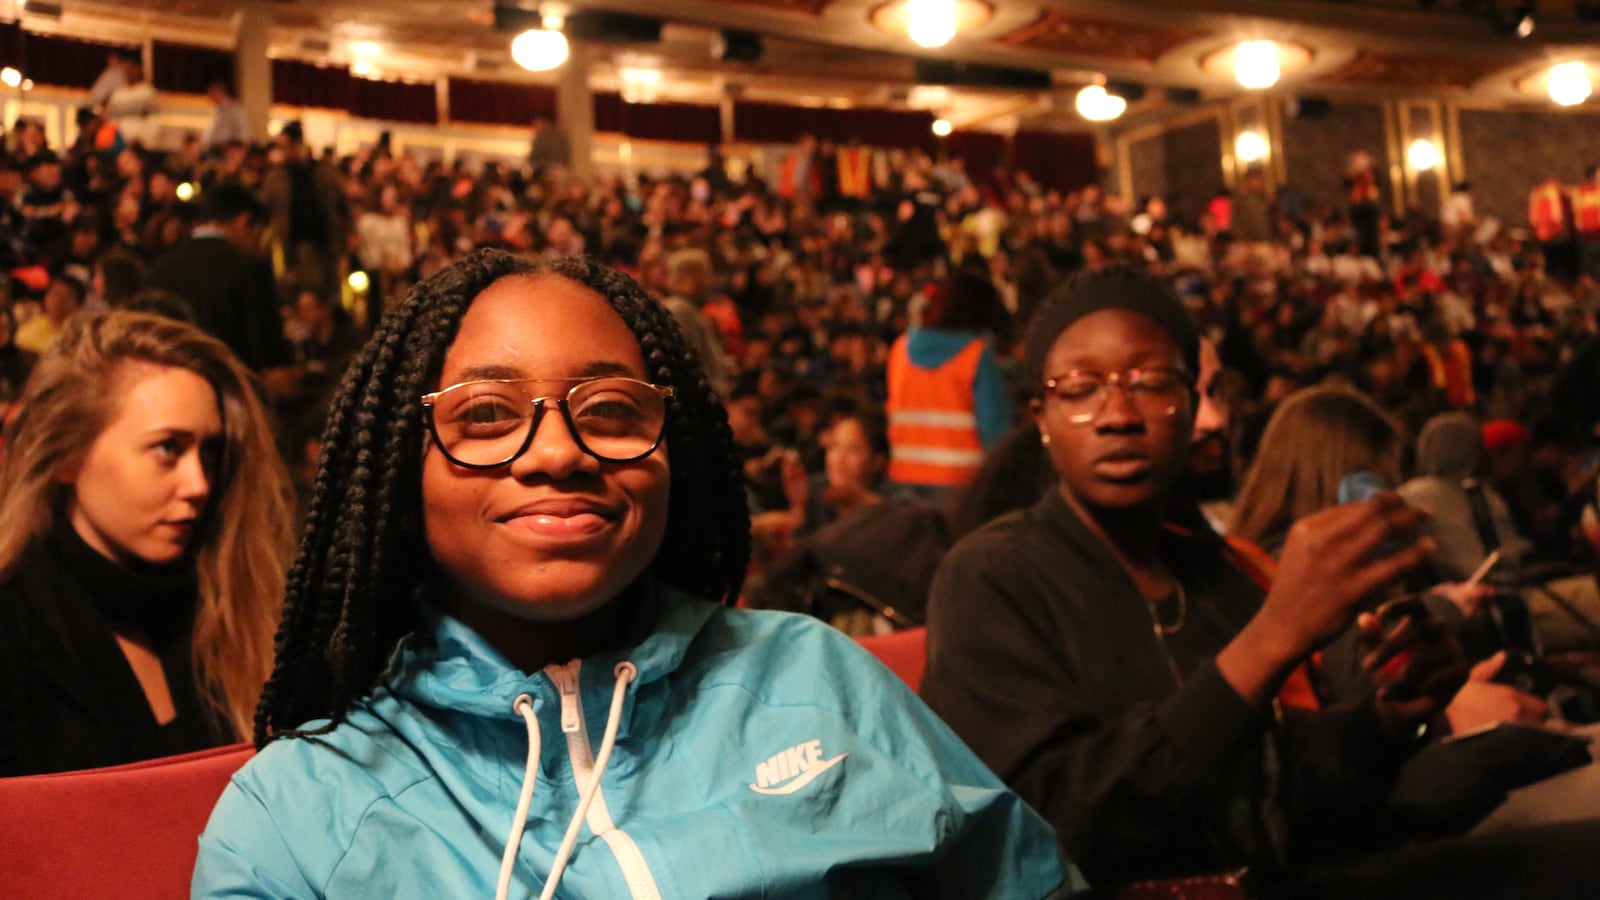 Oluwafunmilayo Famuyiwa, a high school junior from Jamaica Gateway to the Sciences, during intermission at "Hamilton."